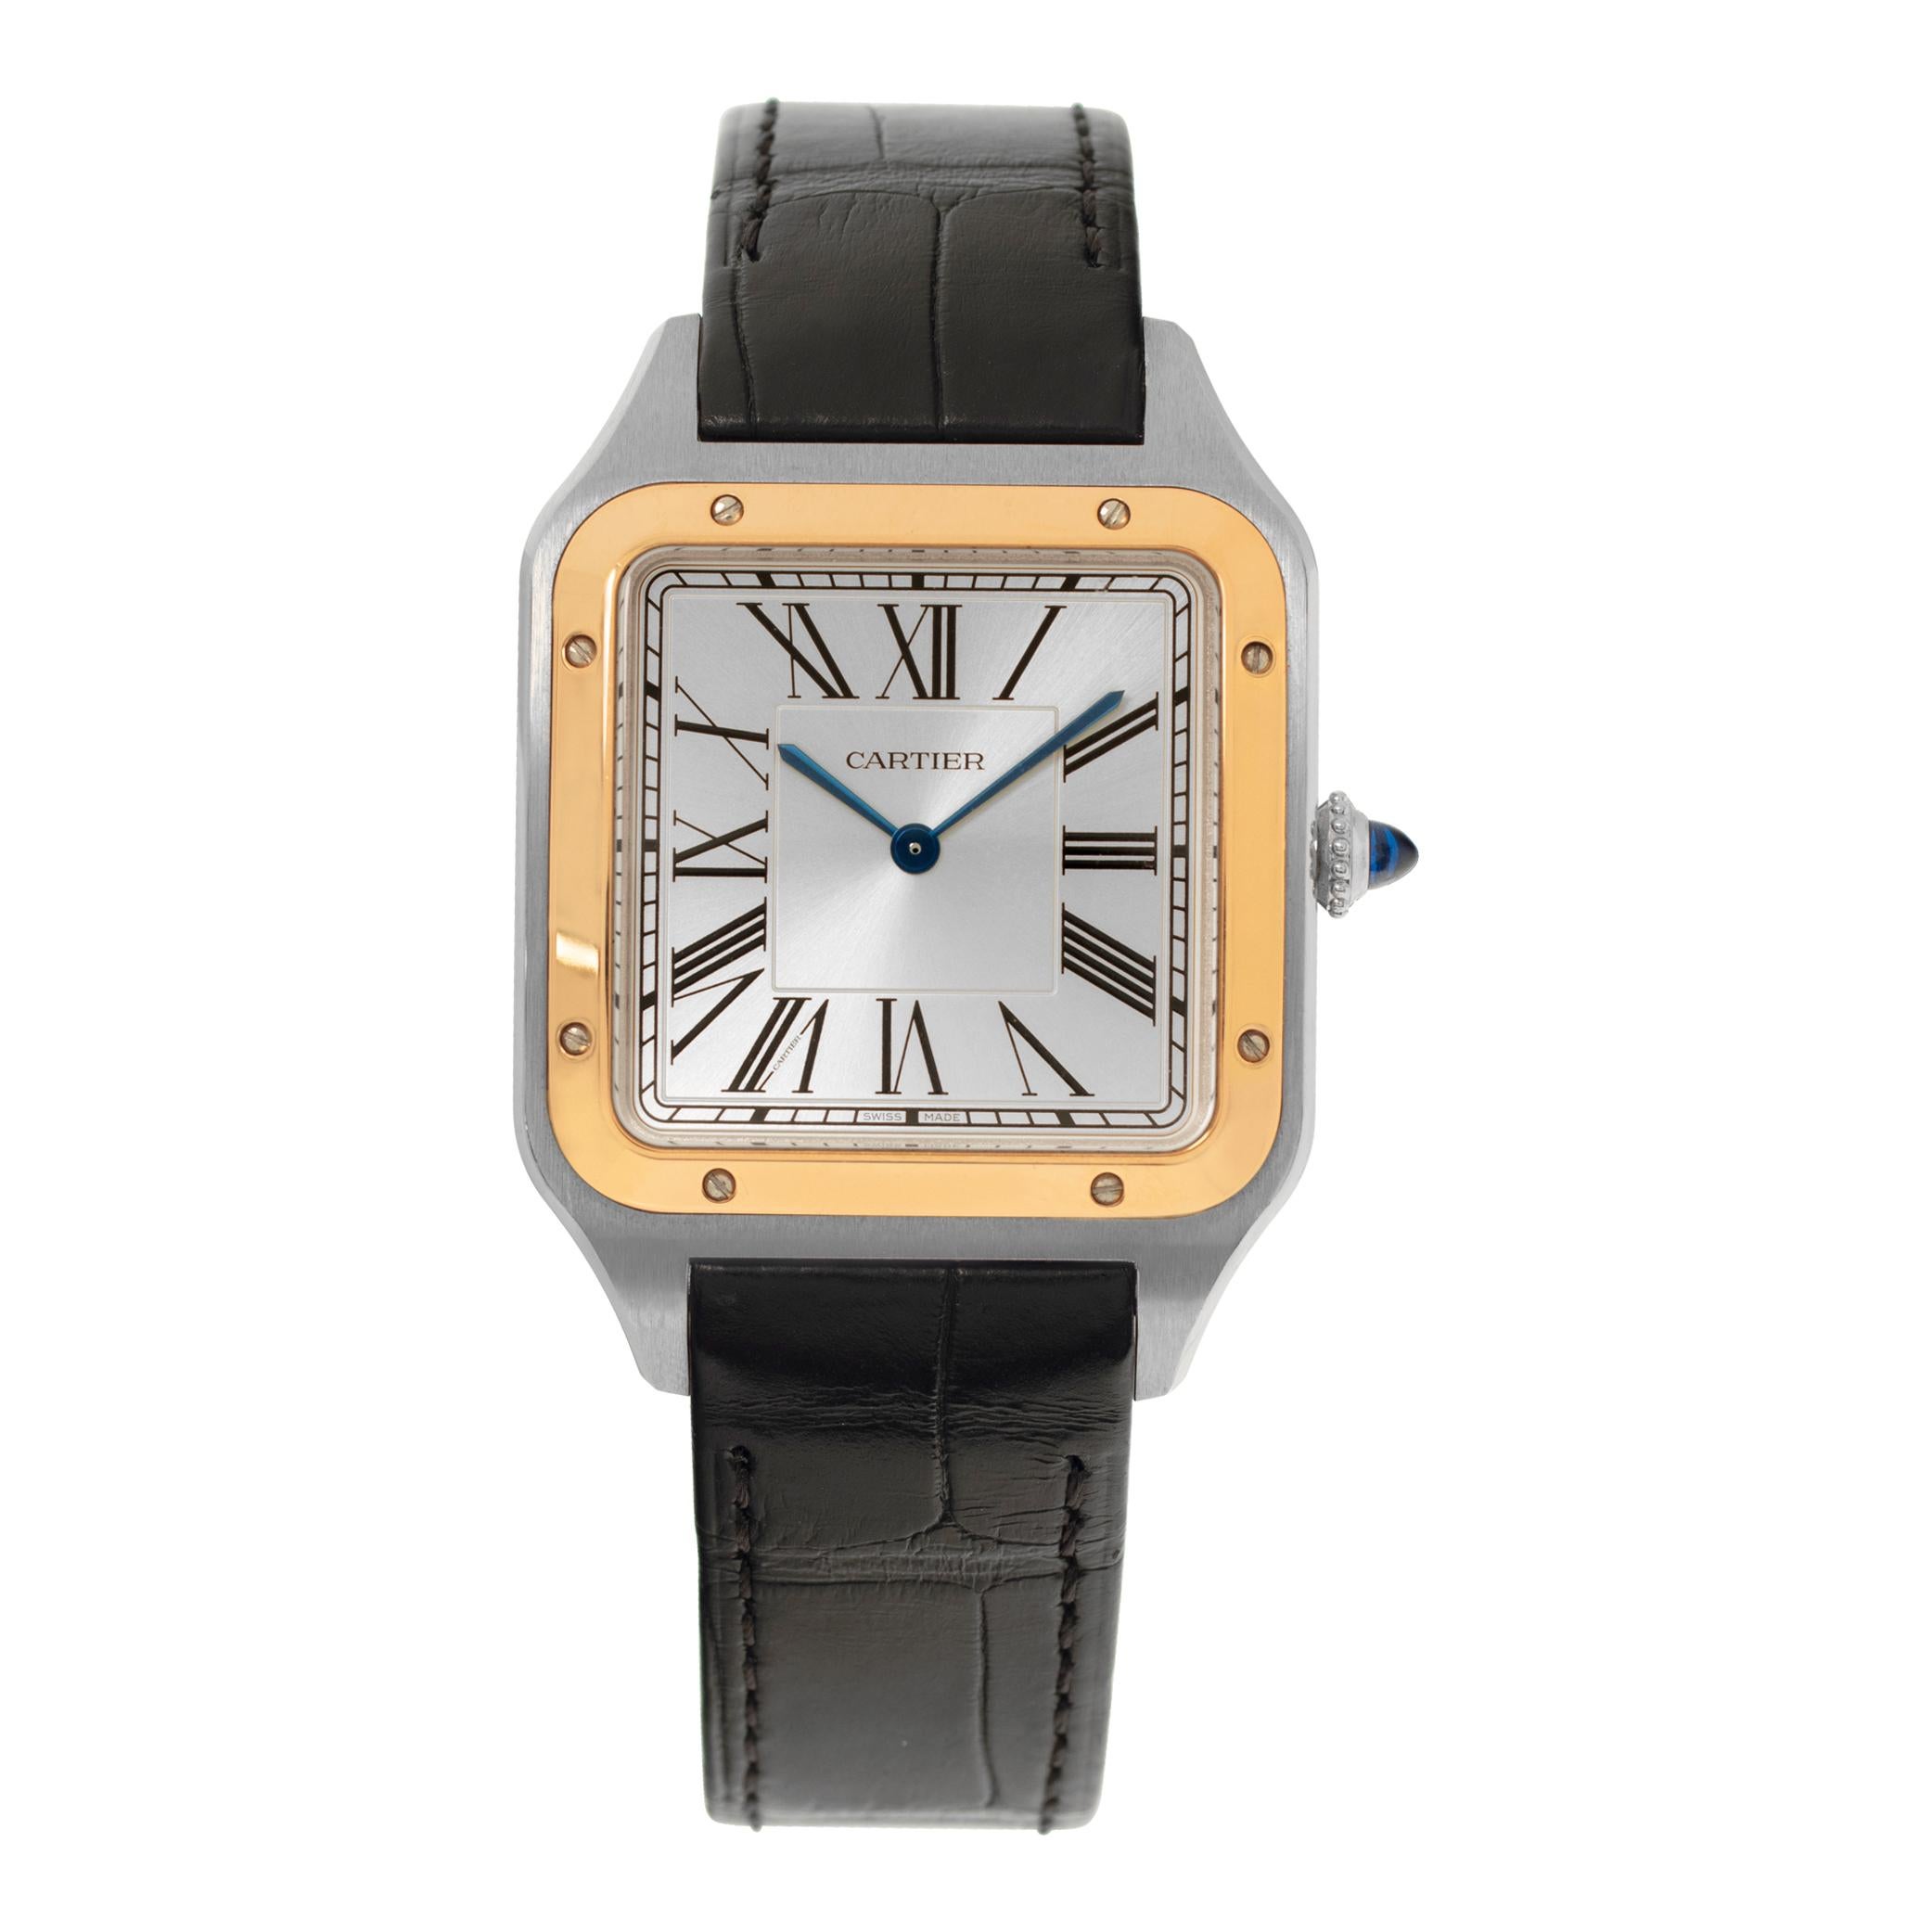 Cartier Santos Dumont 18k gold & stainless steel Manual Wristwatch Ref w2sa0017 For Sale